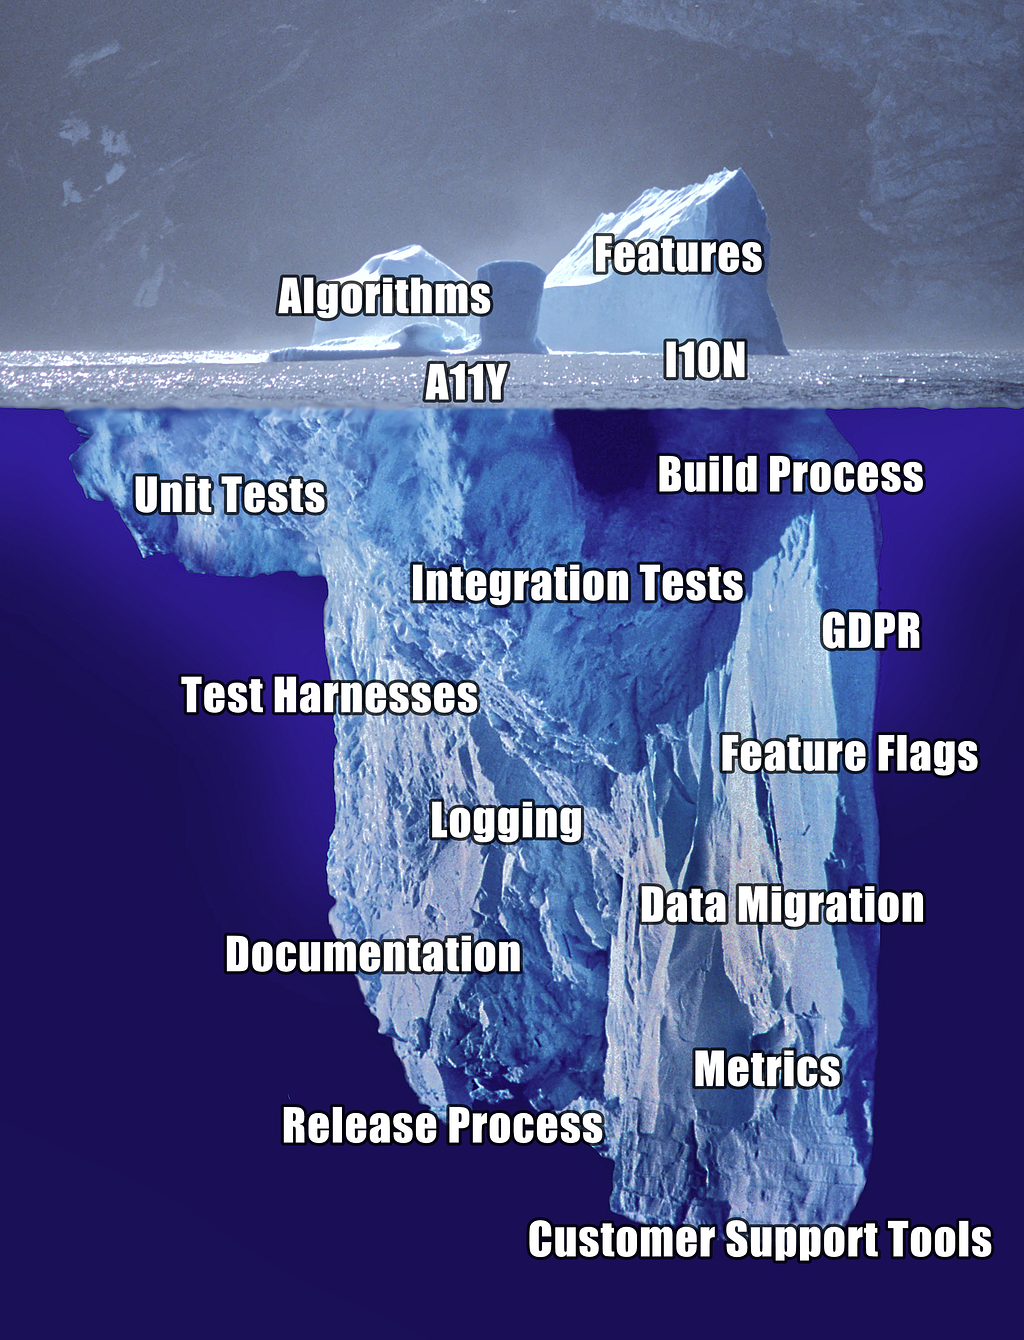 Iceberg labeled with “Algorithms”, “Features”, “Accessibility”, “Unit Tests”, “Build Process”, “GDPR”, “Feature Flags”, and many other labels.